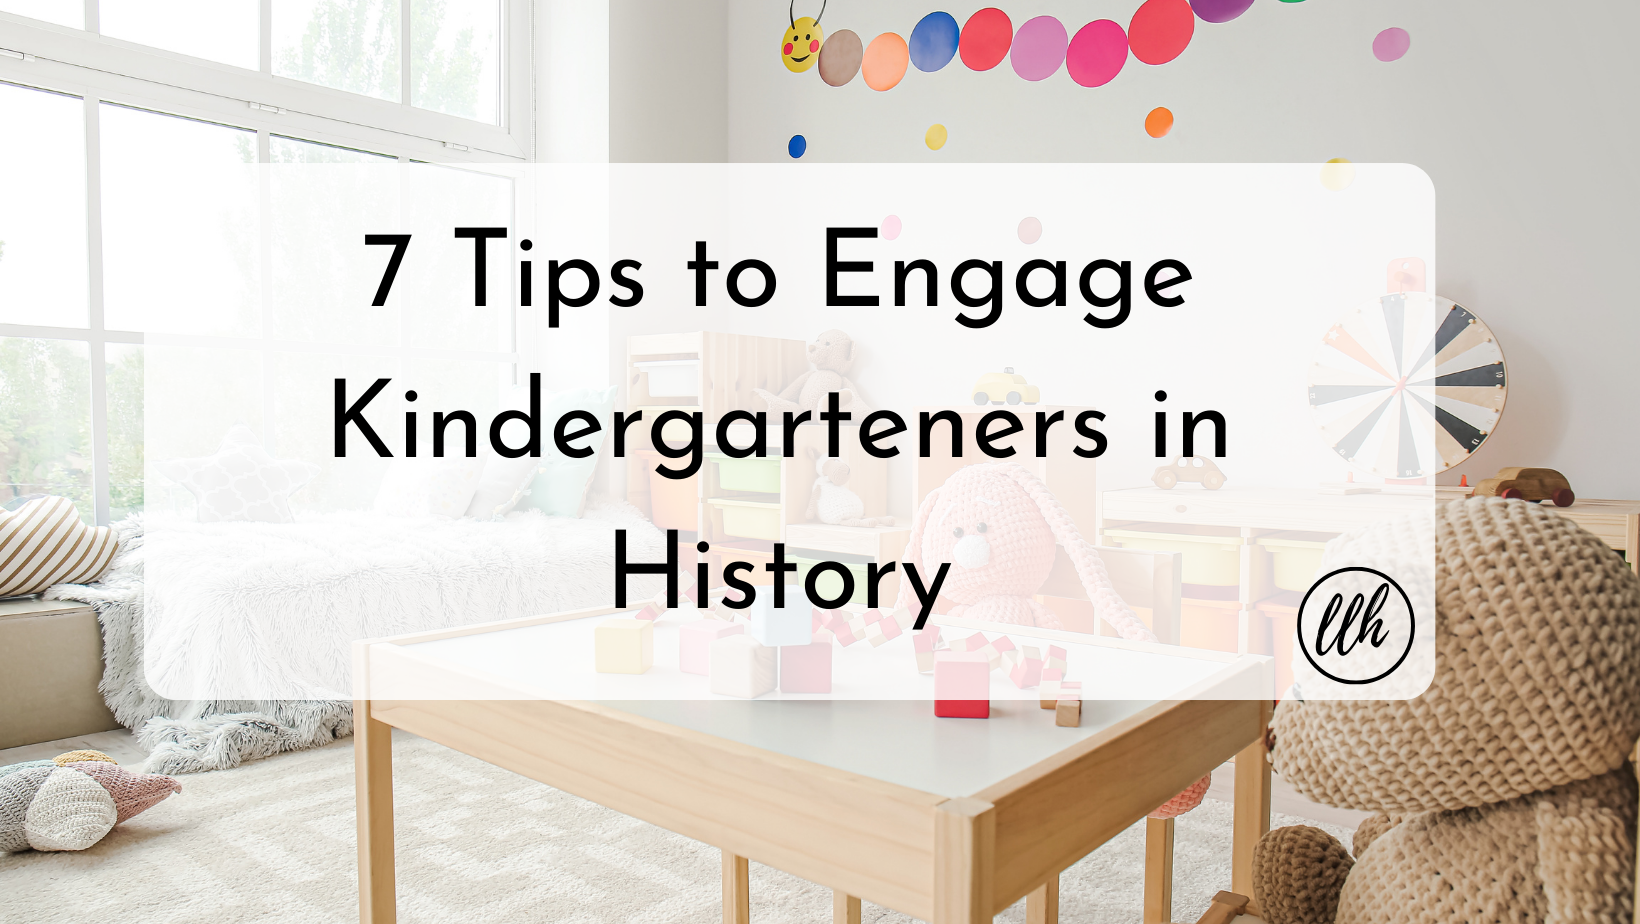 7 Tips to Engage Kindergarteners in History